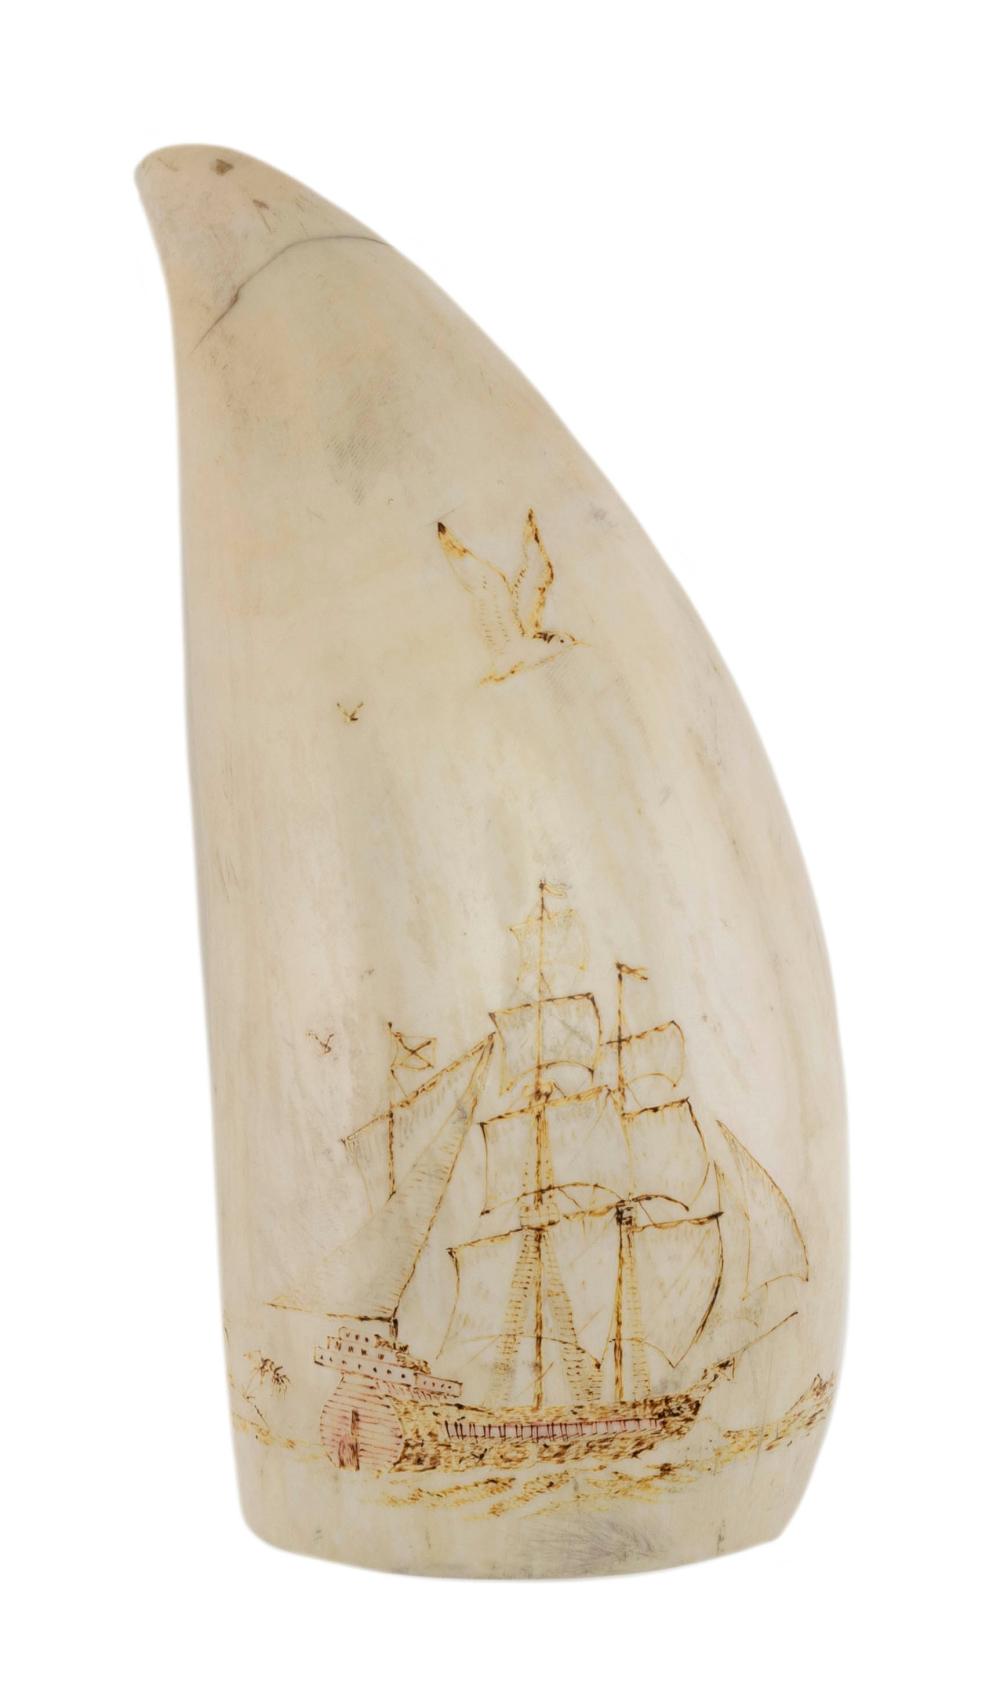 ESKIMO ENGRAVED WHALE’S TOOTH